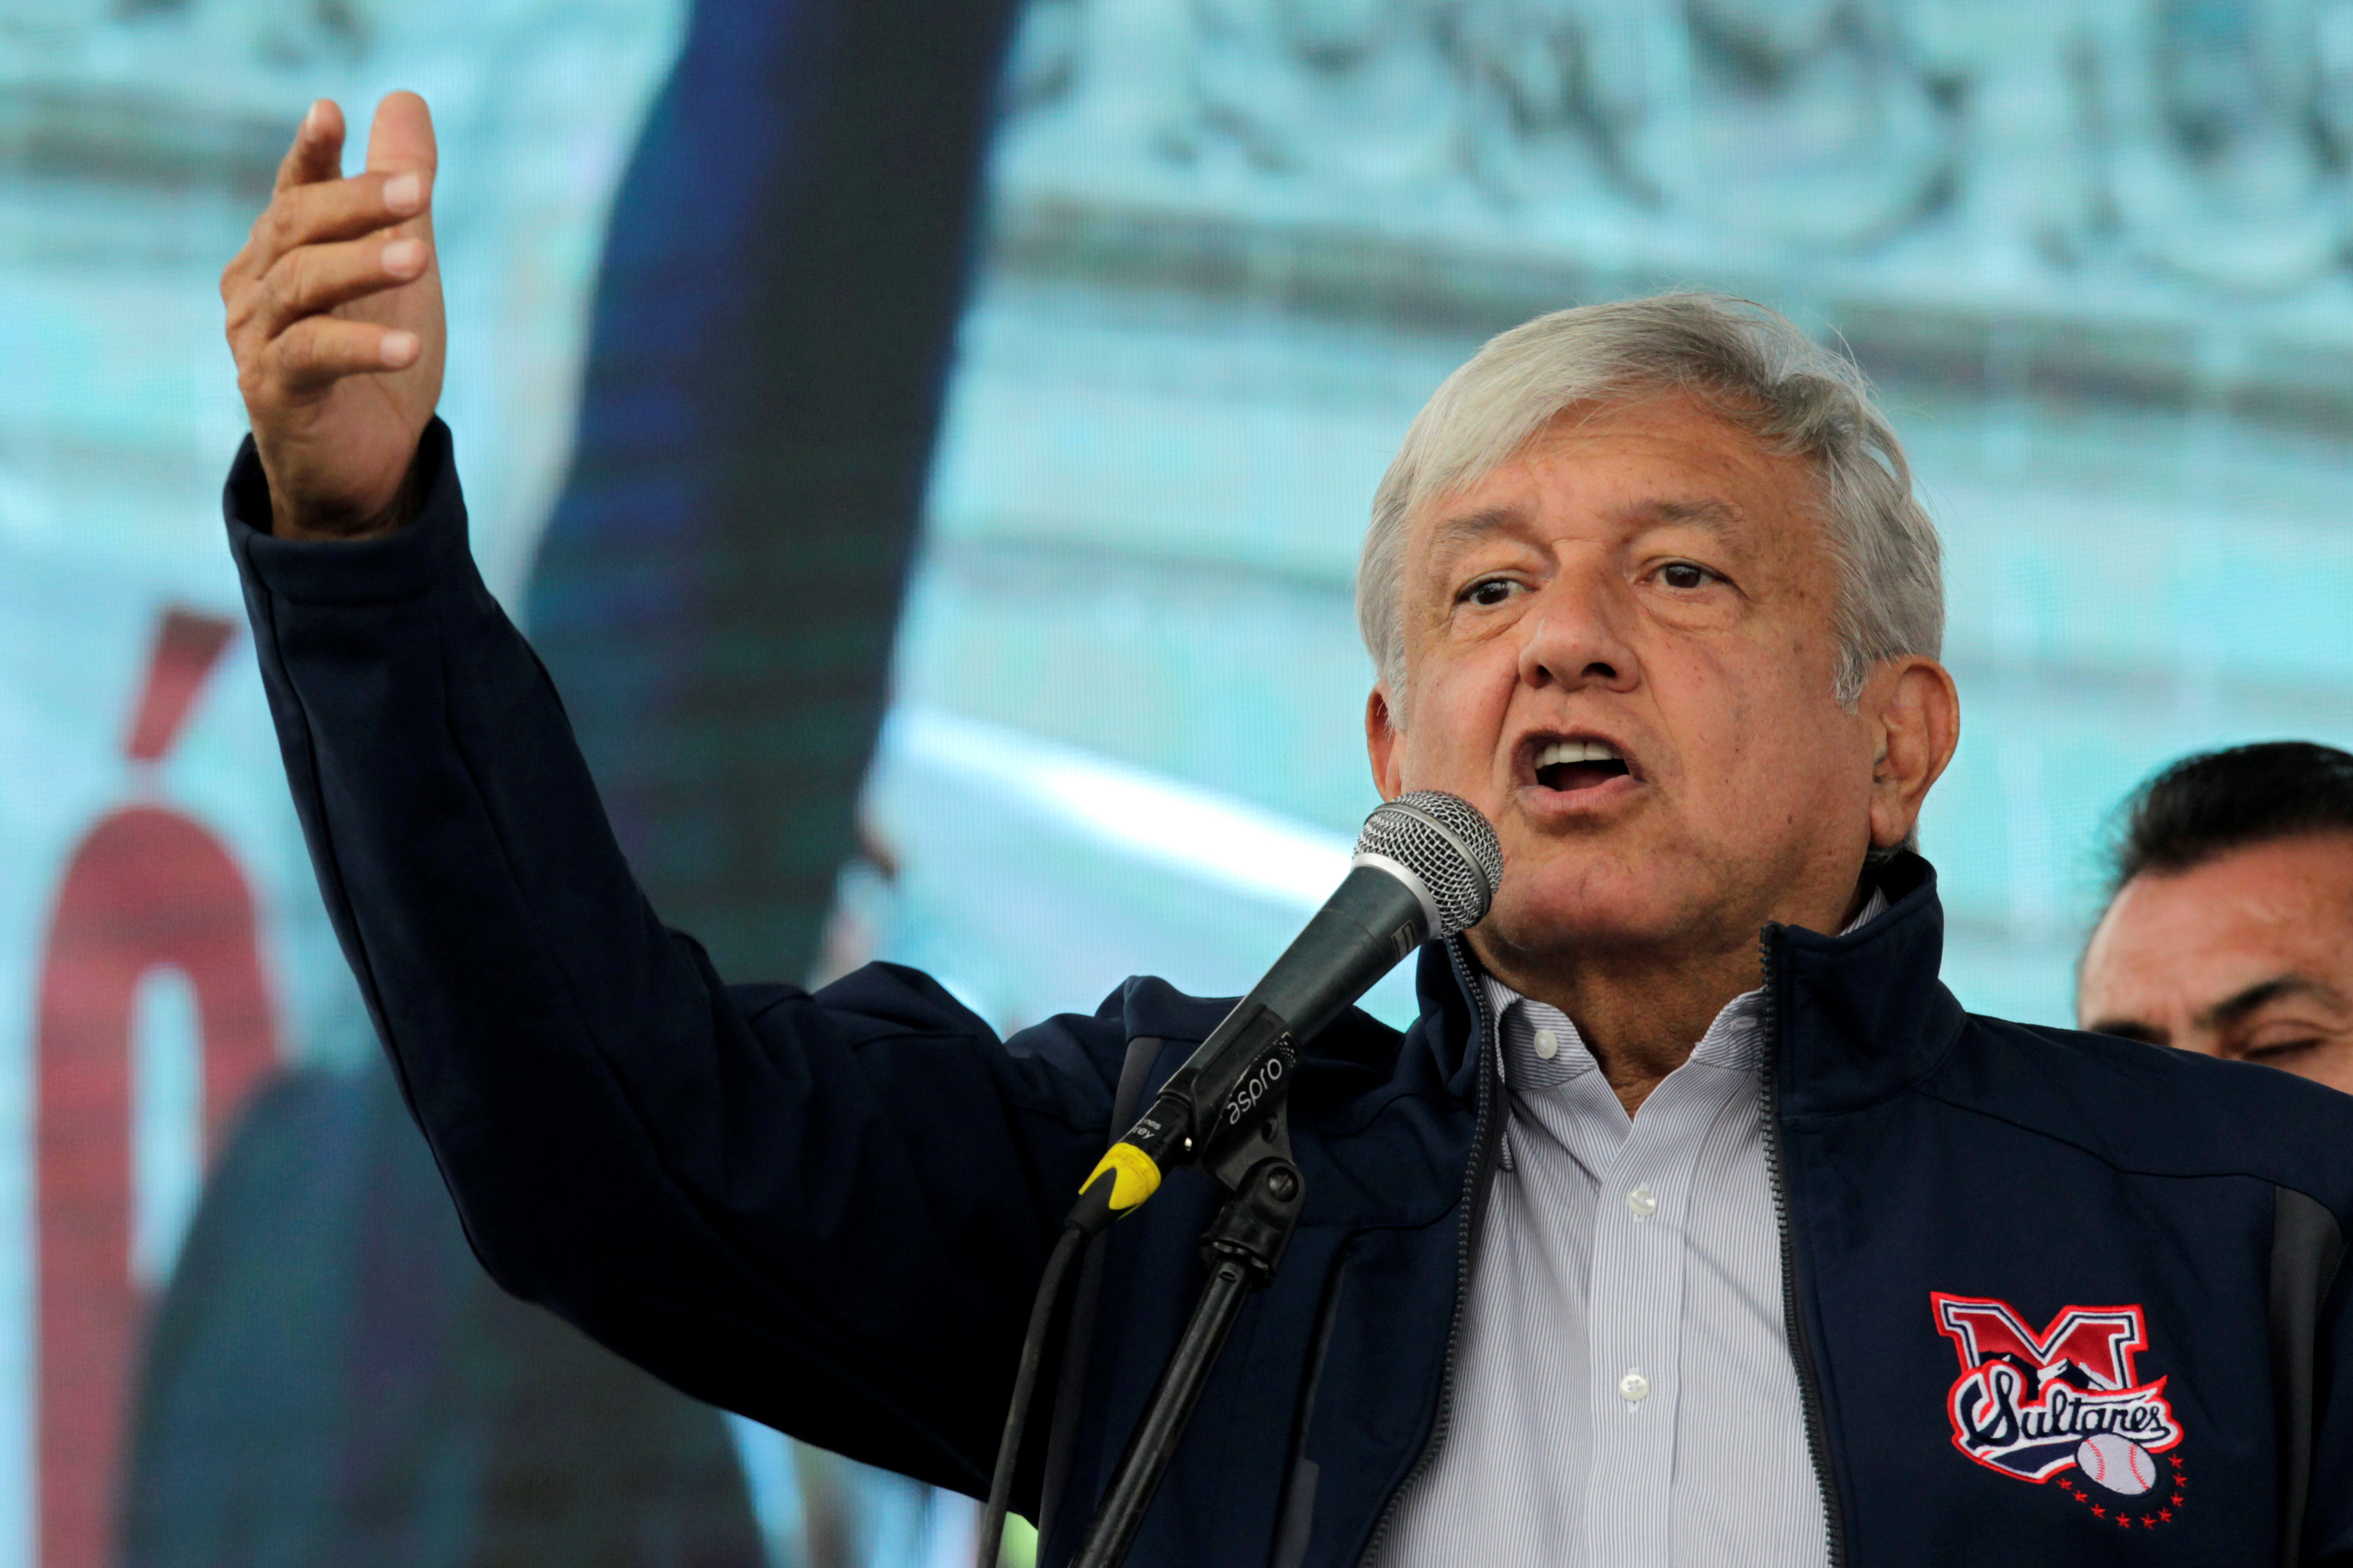 Mexico's President-elect Andres Manuel Lopez Obrador talks to supporters as he continues with his tour to thank supporters for his victory in the July 1 election in Monterrey, Mexico October 19, 2018. REUTERS/Daniel Becerril - RC16AFC9D770